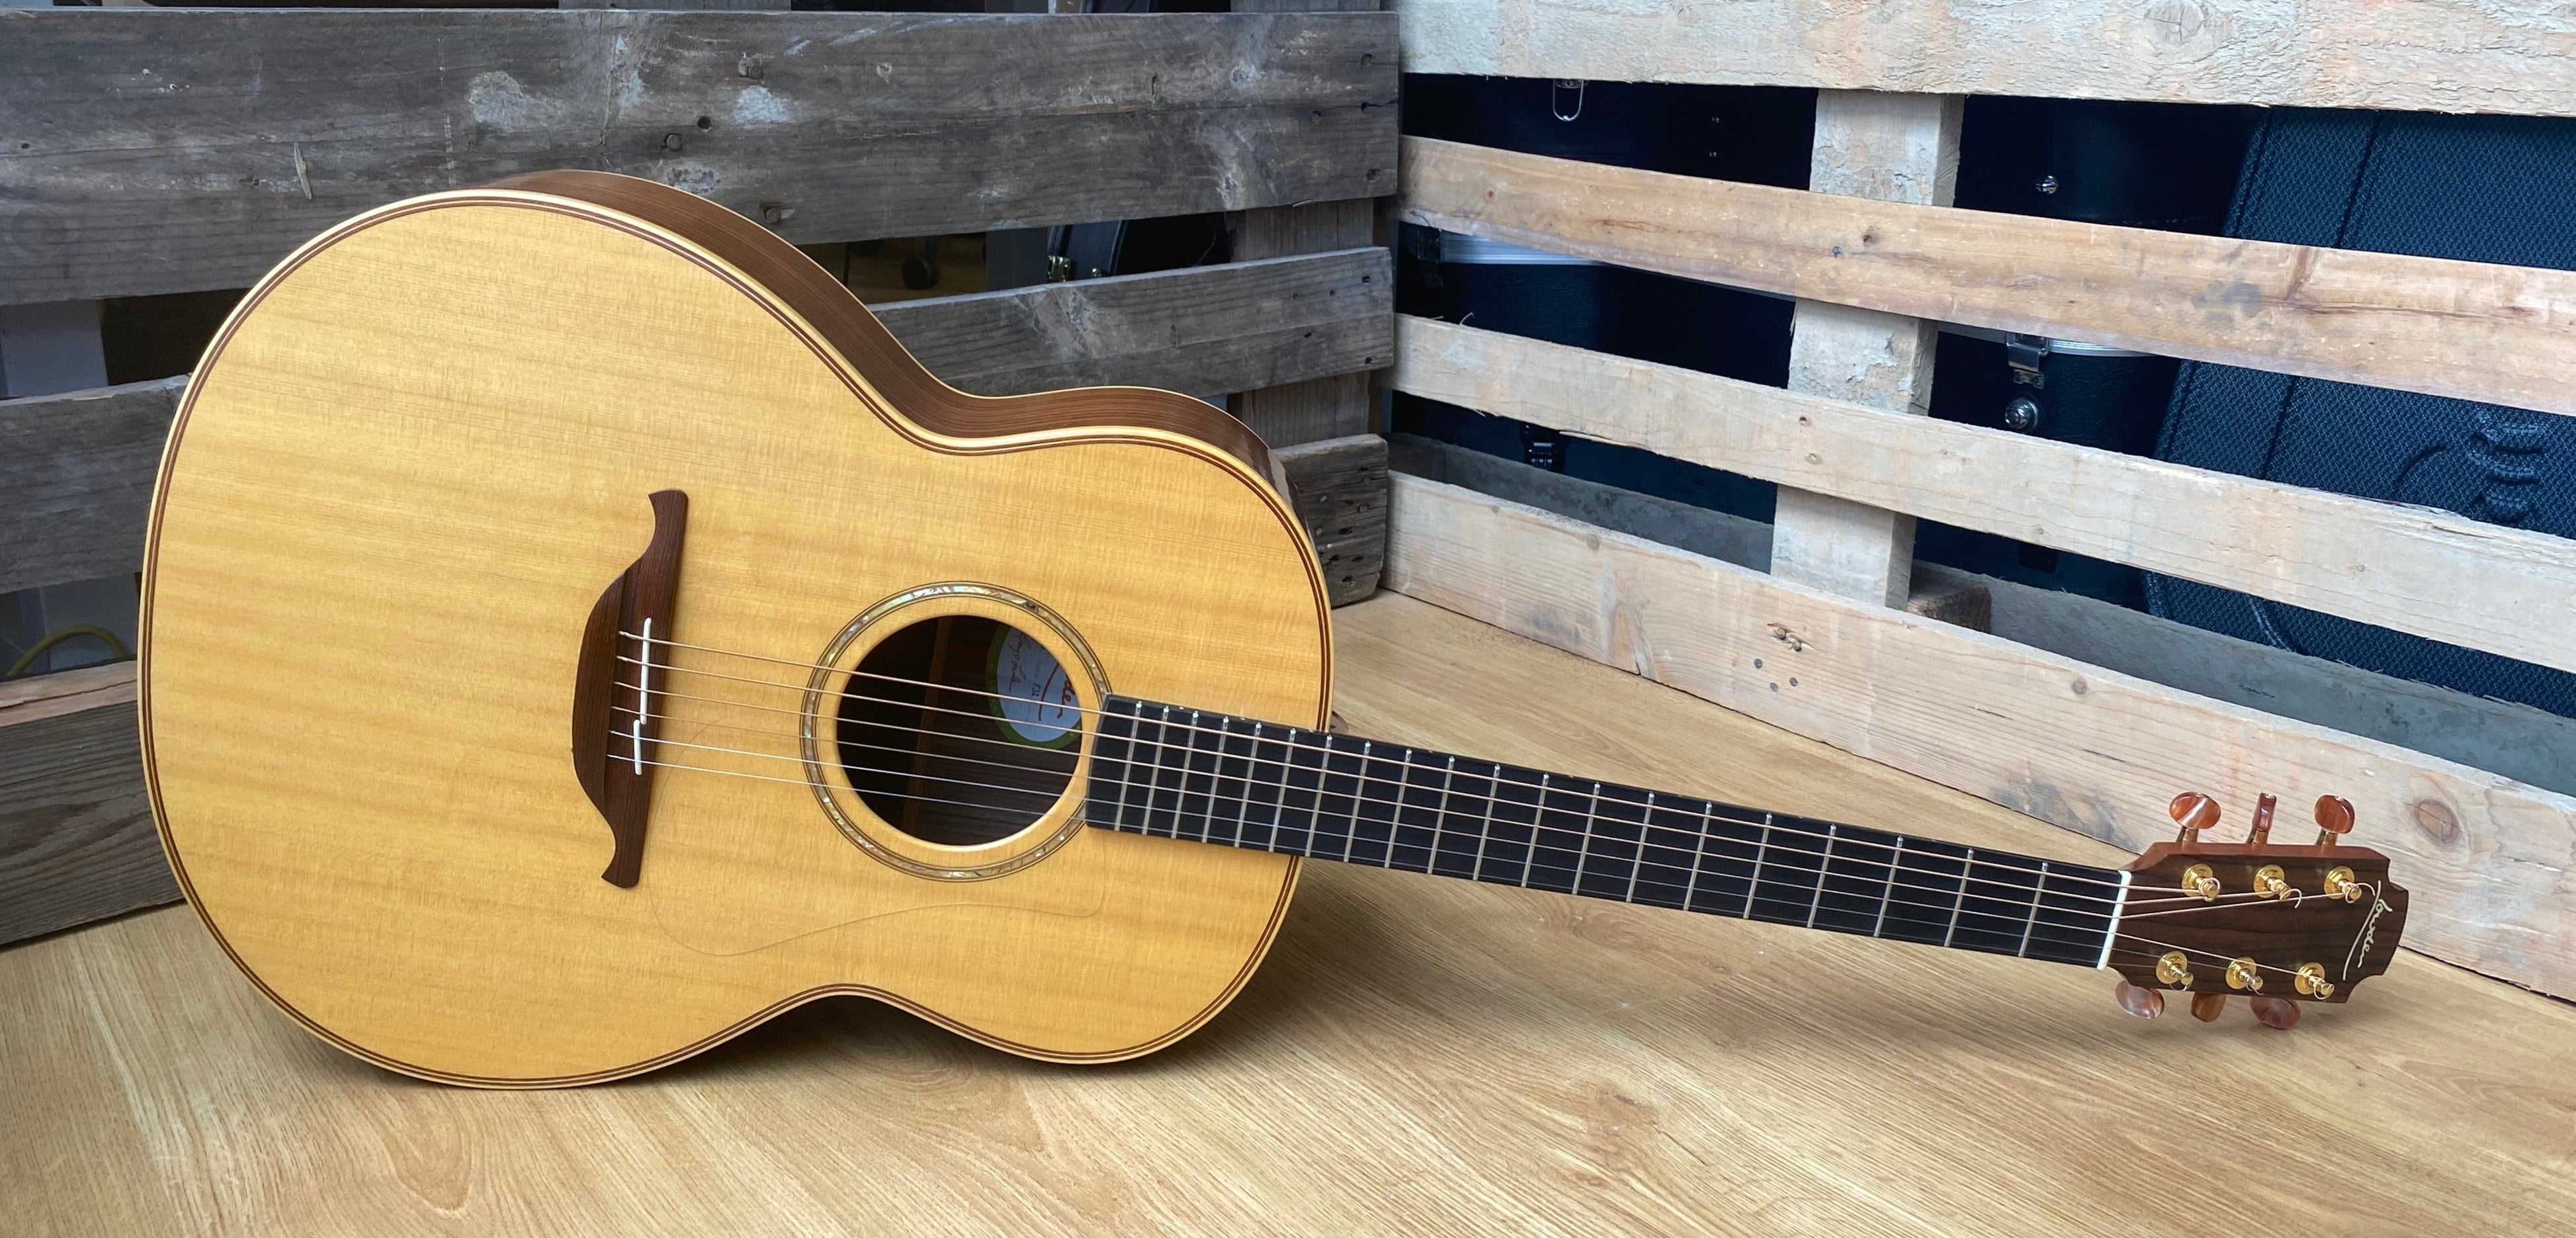 Lowden F32 Spruce/Rosewood - 26 Years Old  (1996)  serial no. 9946 - A1 Condition, Acoustic Guitar for sale at Richards Guitars.